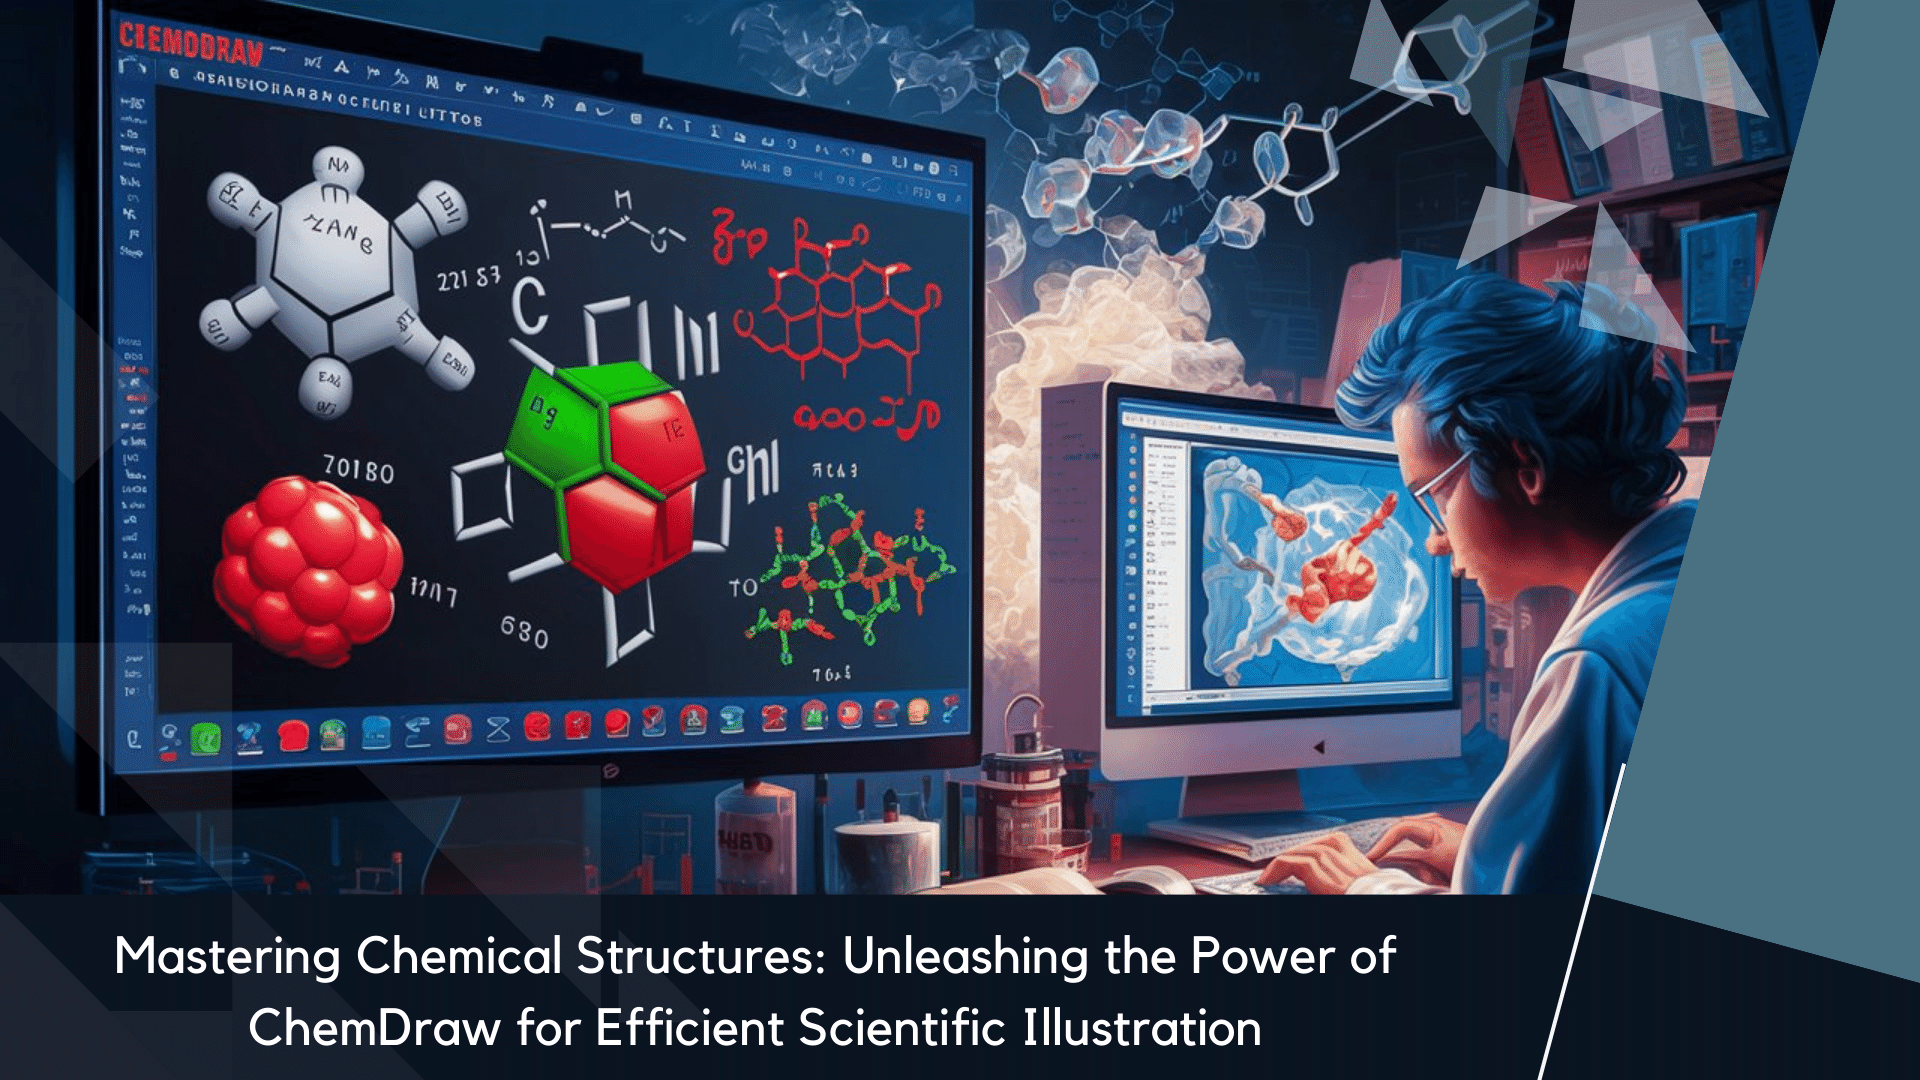 Mastering Chemical Structures Unleashing the Power of ChemDraw for Efficient Scientific Illustration